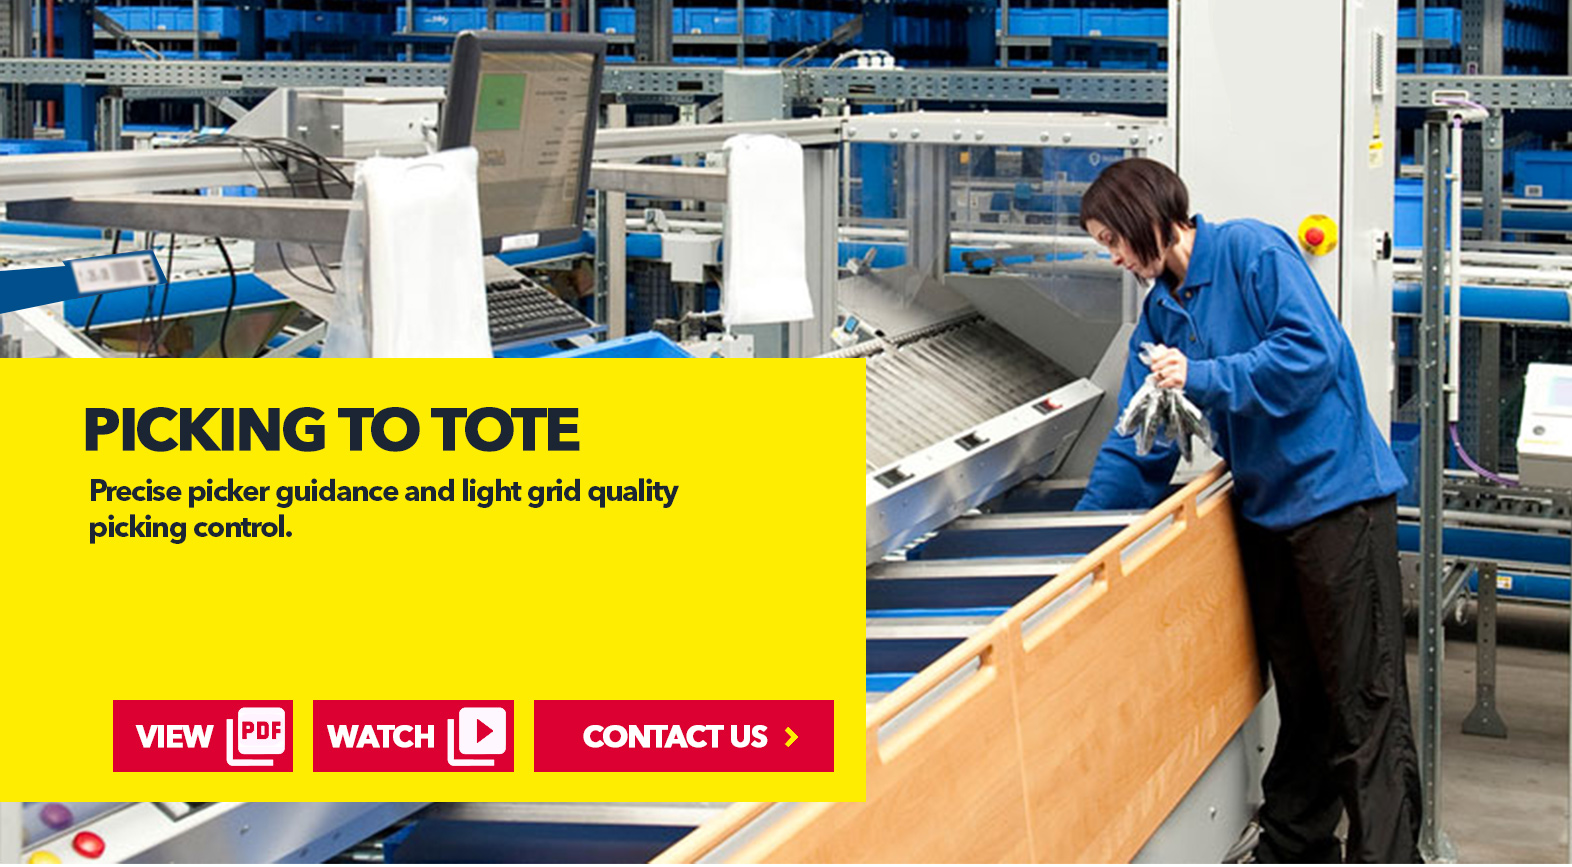 Picking to Tote by SSI Schaefer USA Download Guide, Watch Video, Contact Us. www.chaefershelving.com